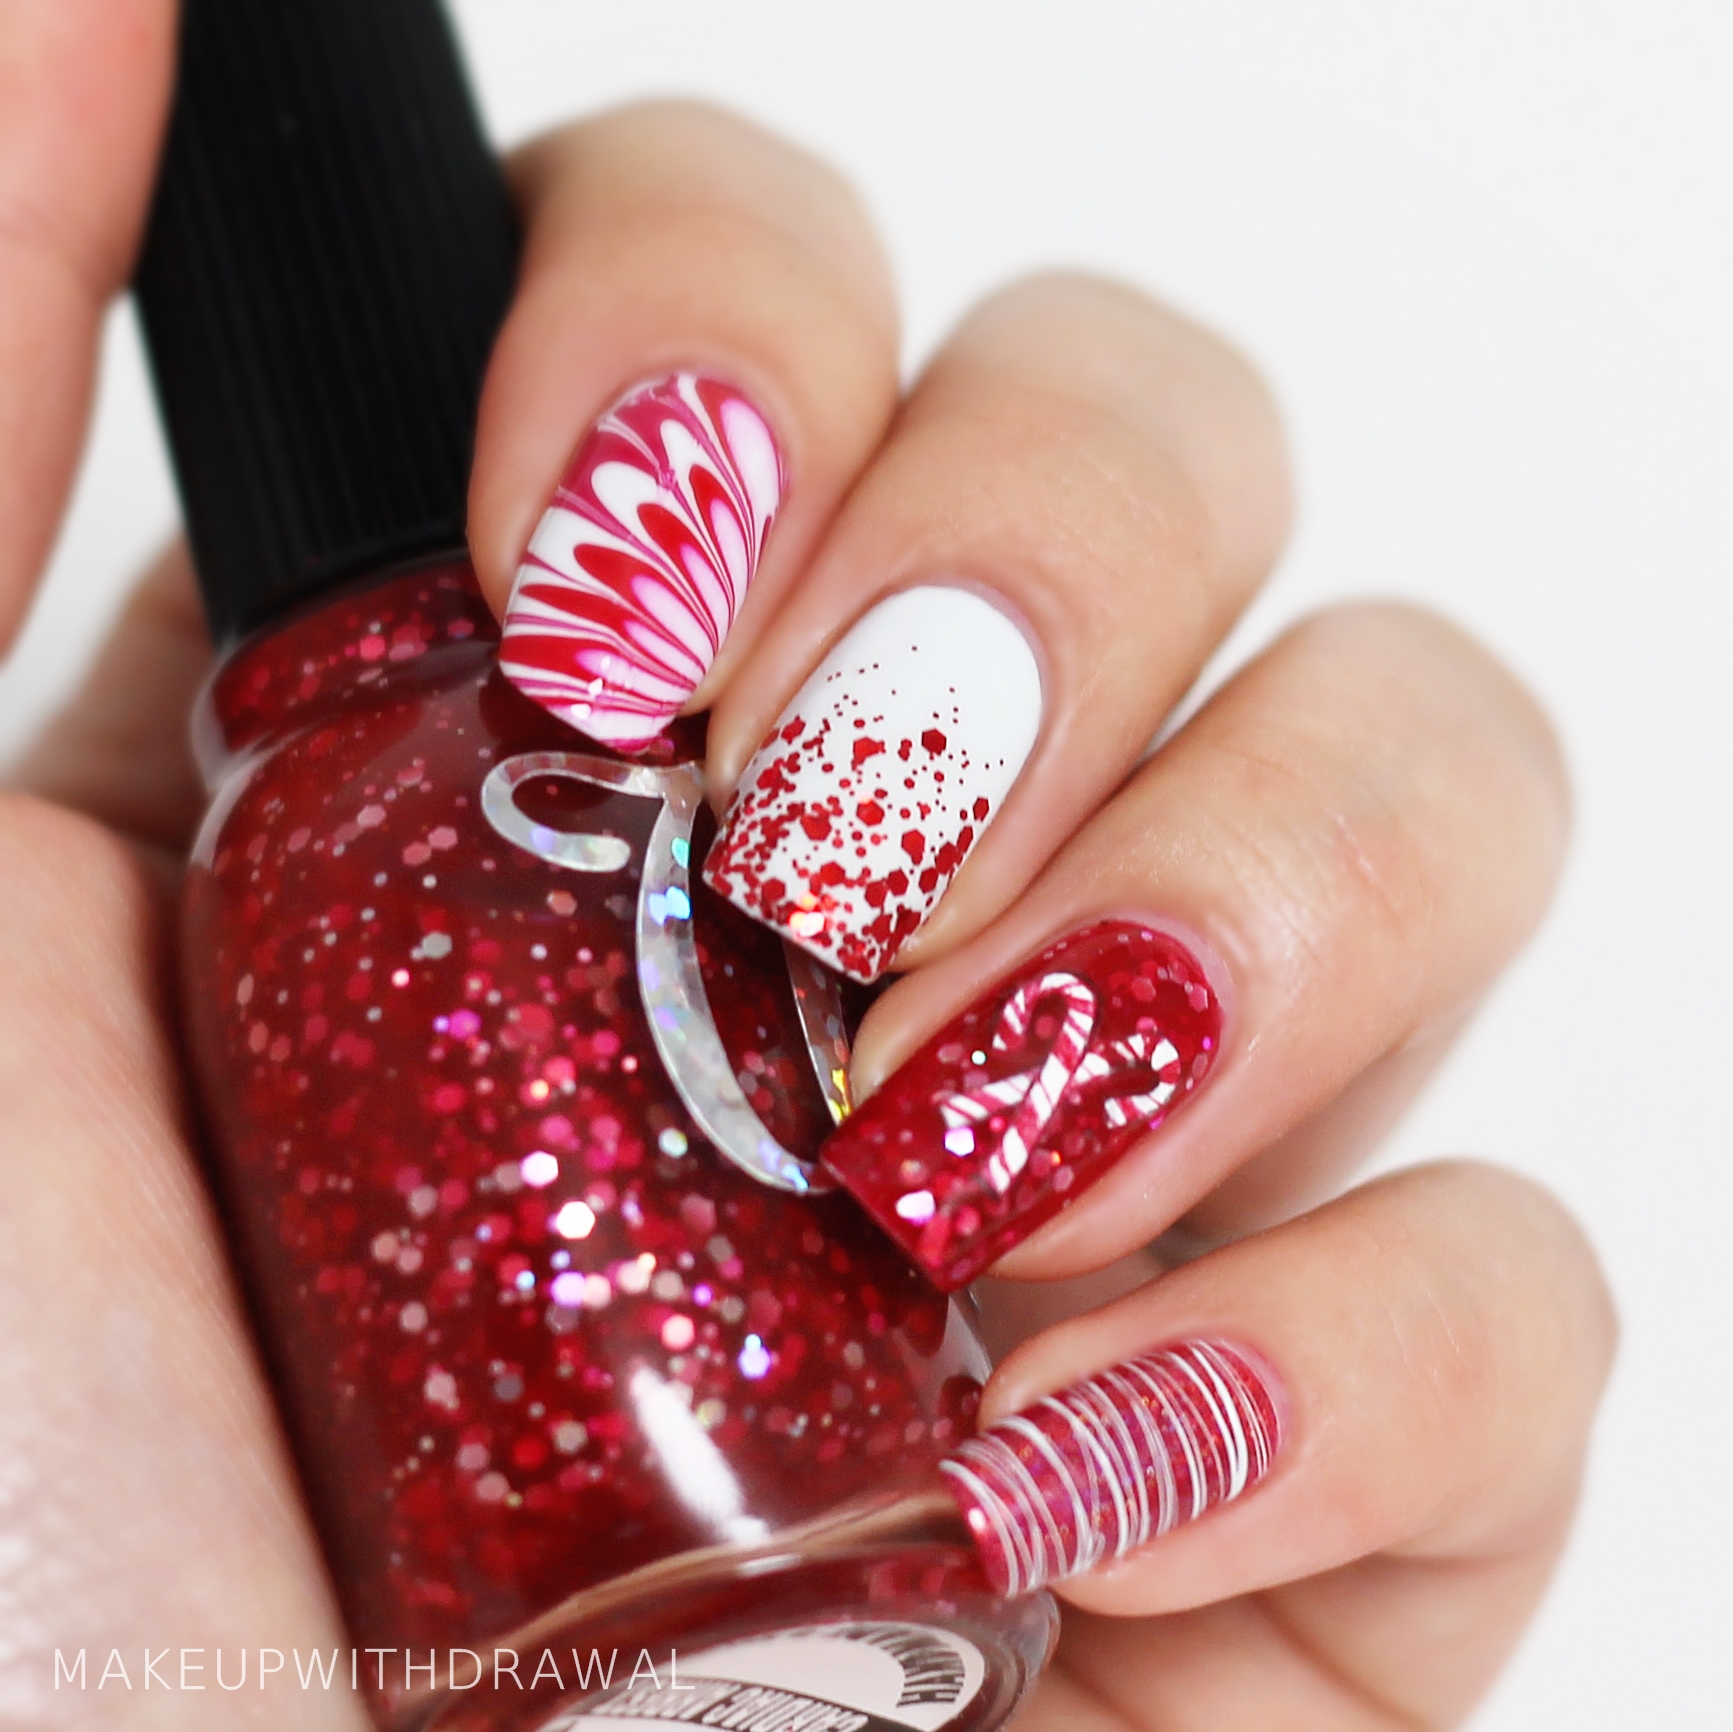 Beautiful Red and White Striped Nail Art Design Ideas 